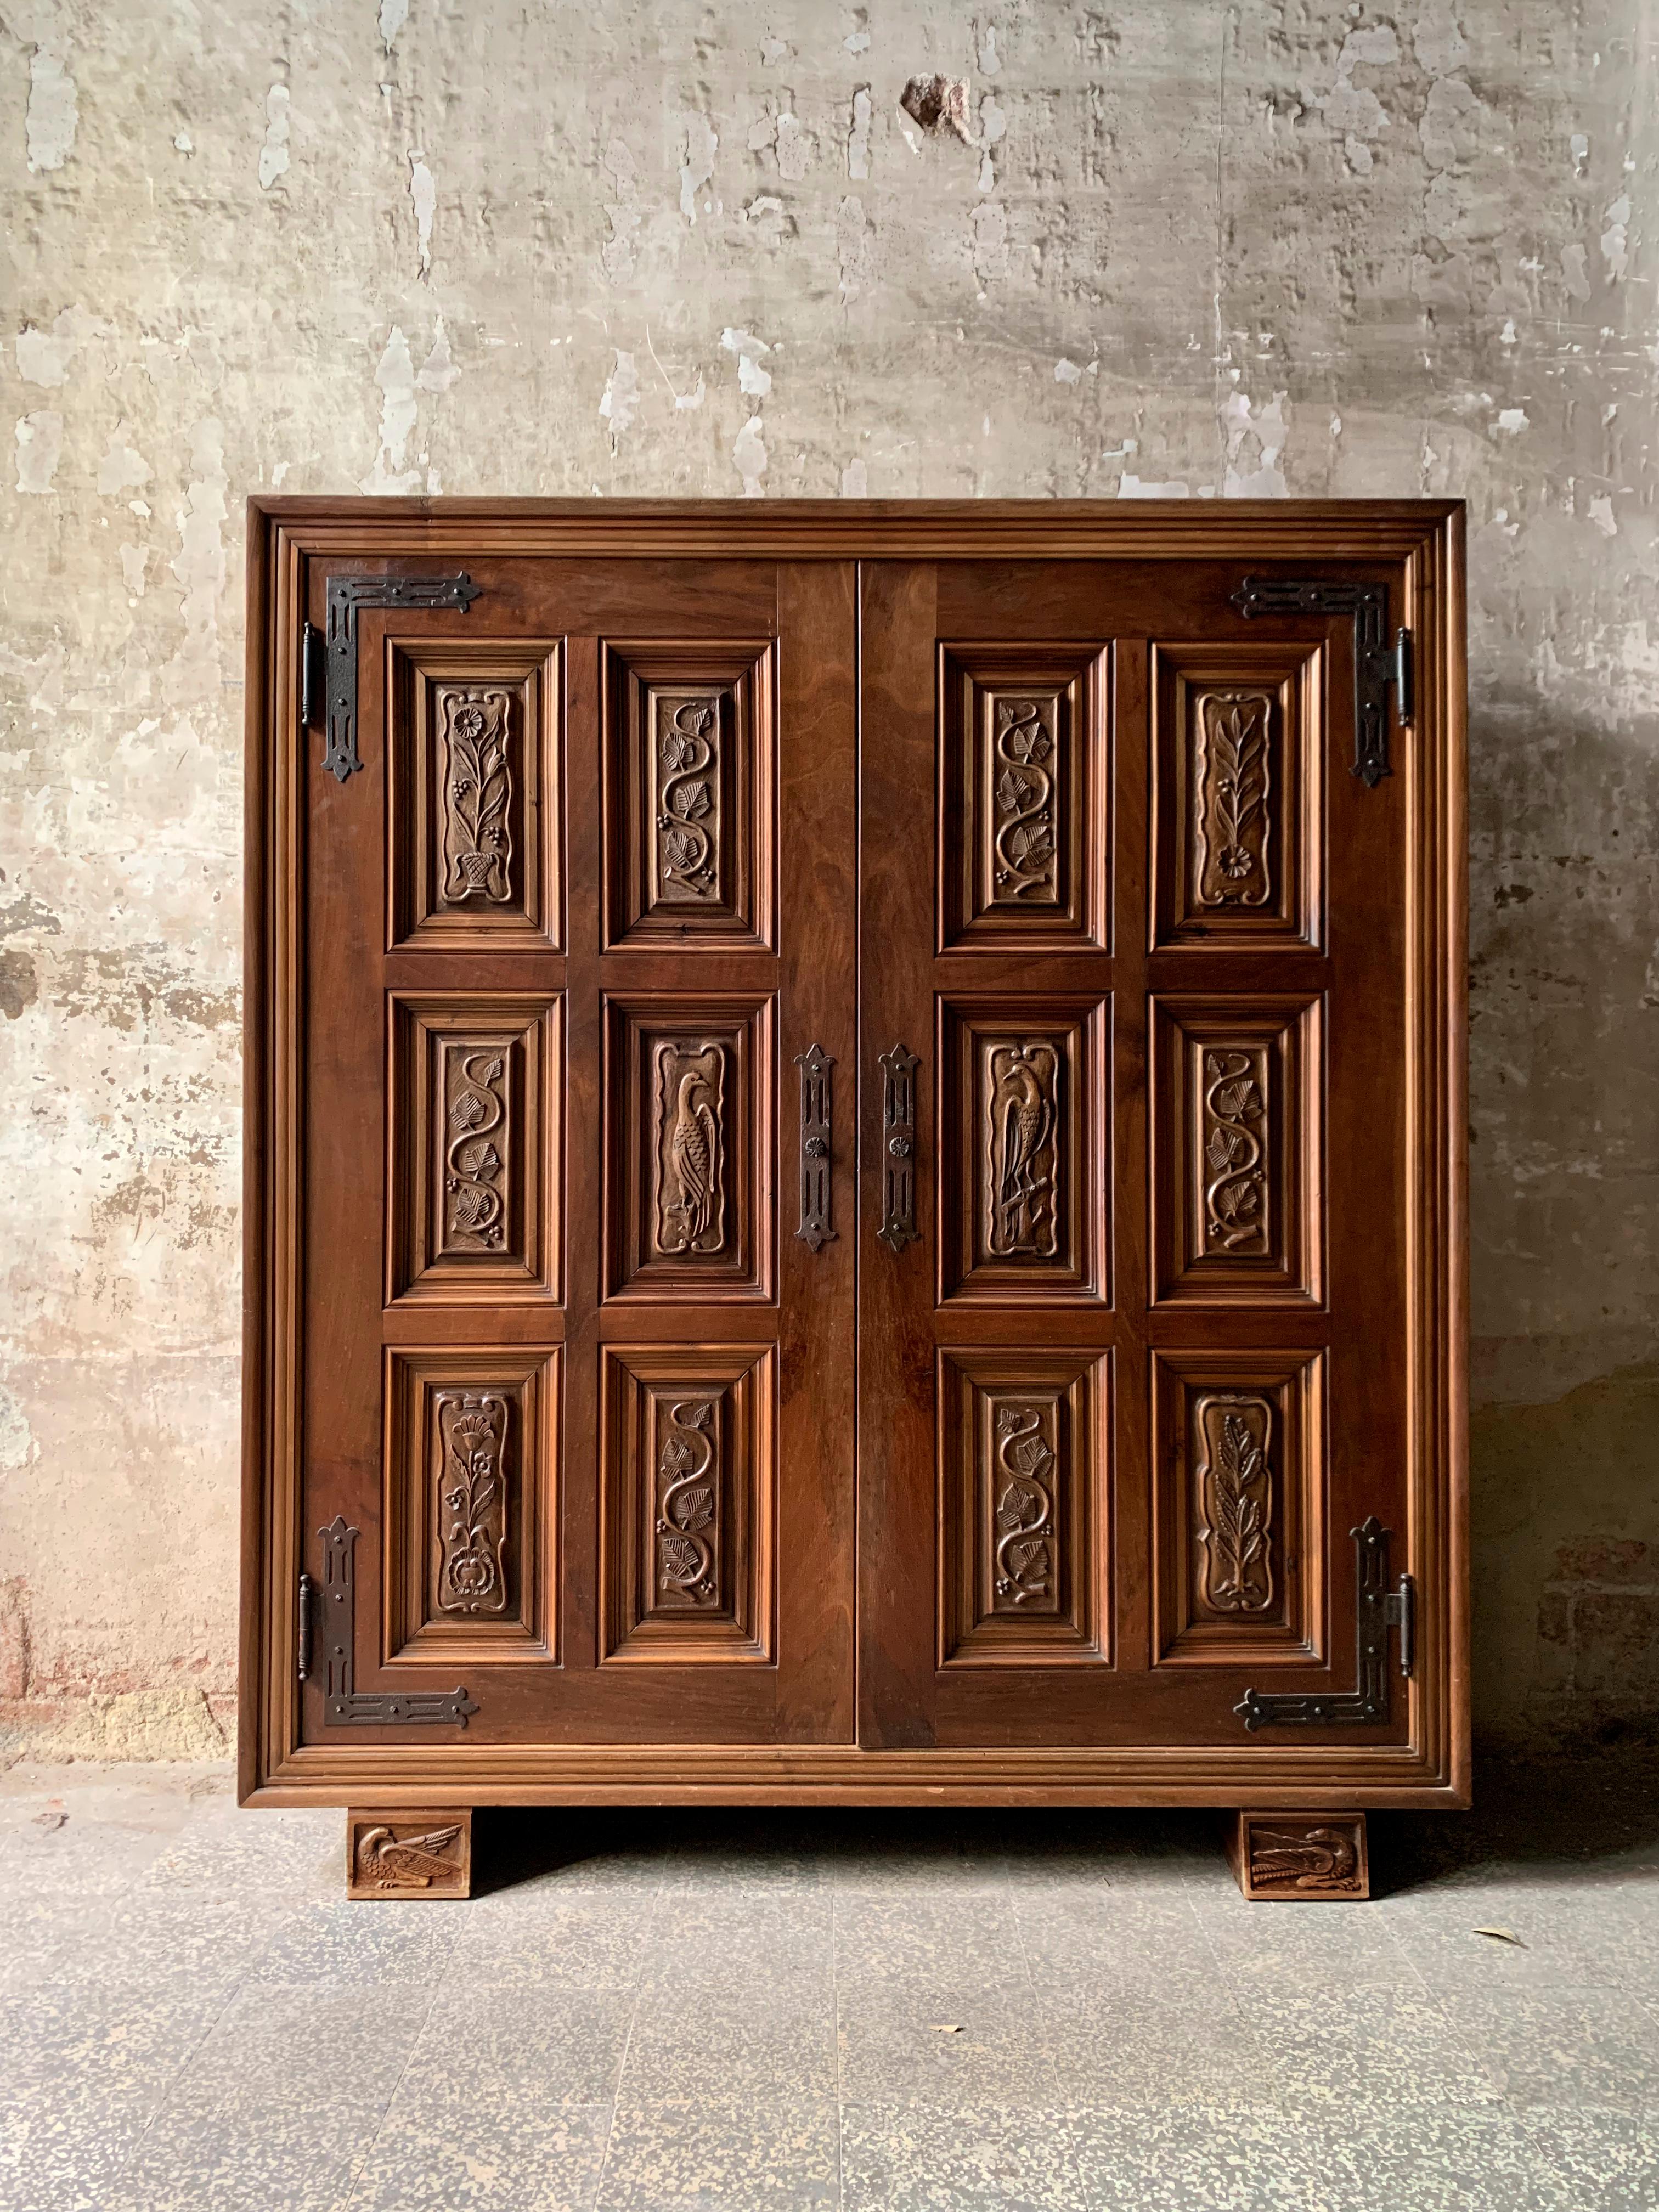 We present to you this magnificent piece of furniture in the Spanish organicist style, a true gem crafted in wood around 1940. Every aspect of this artisanal piece exudes charm and elegance, capturing the essence of Spanish design from that era. The